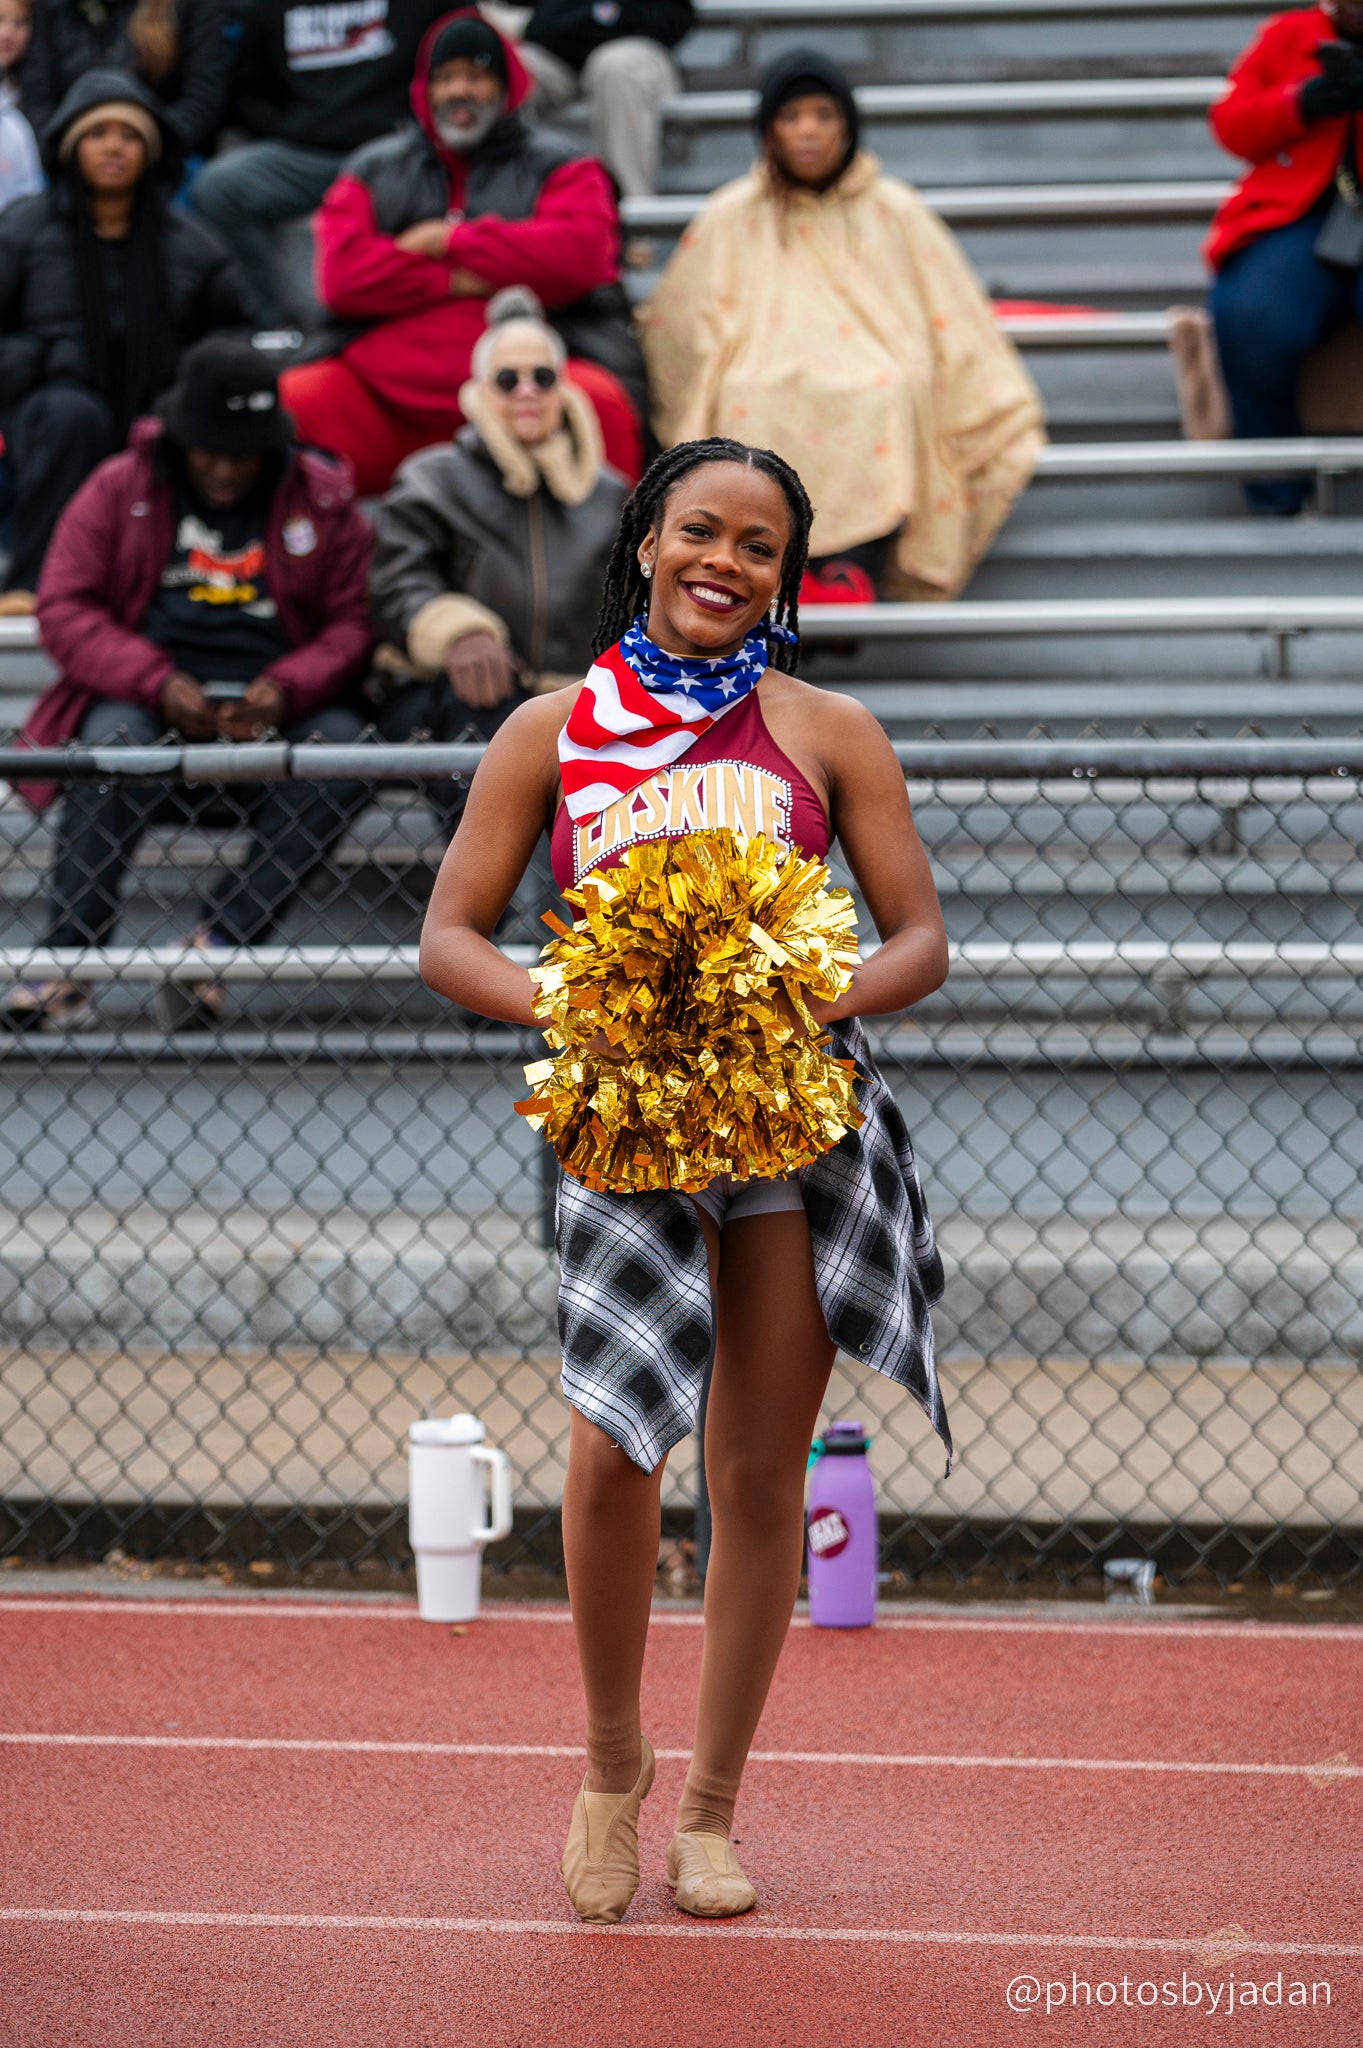 Cheerleader poses in front of the stands